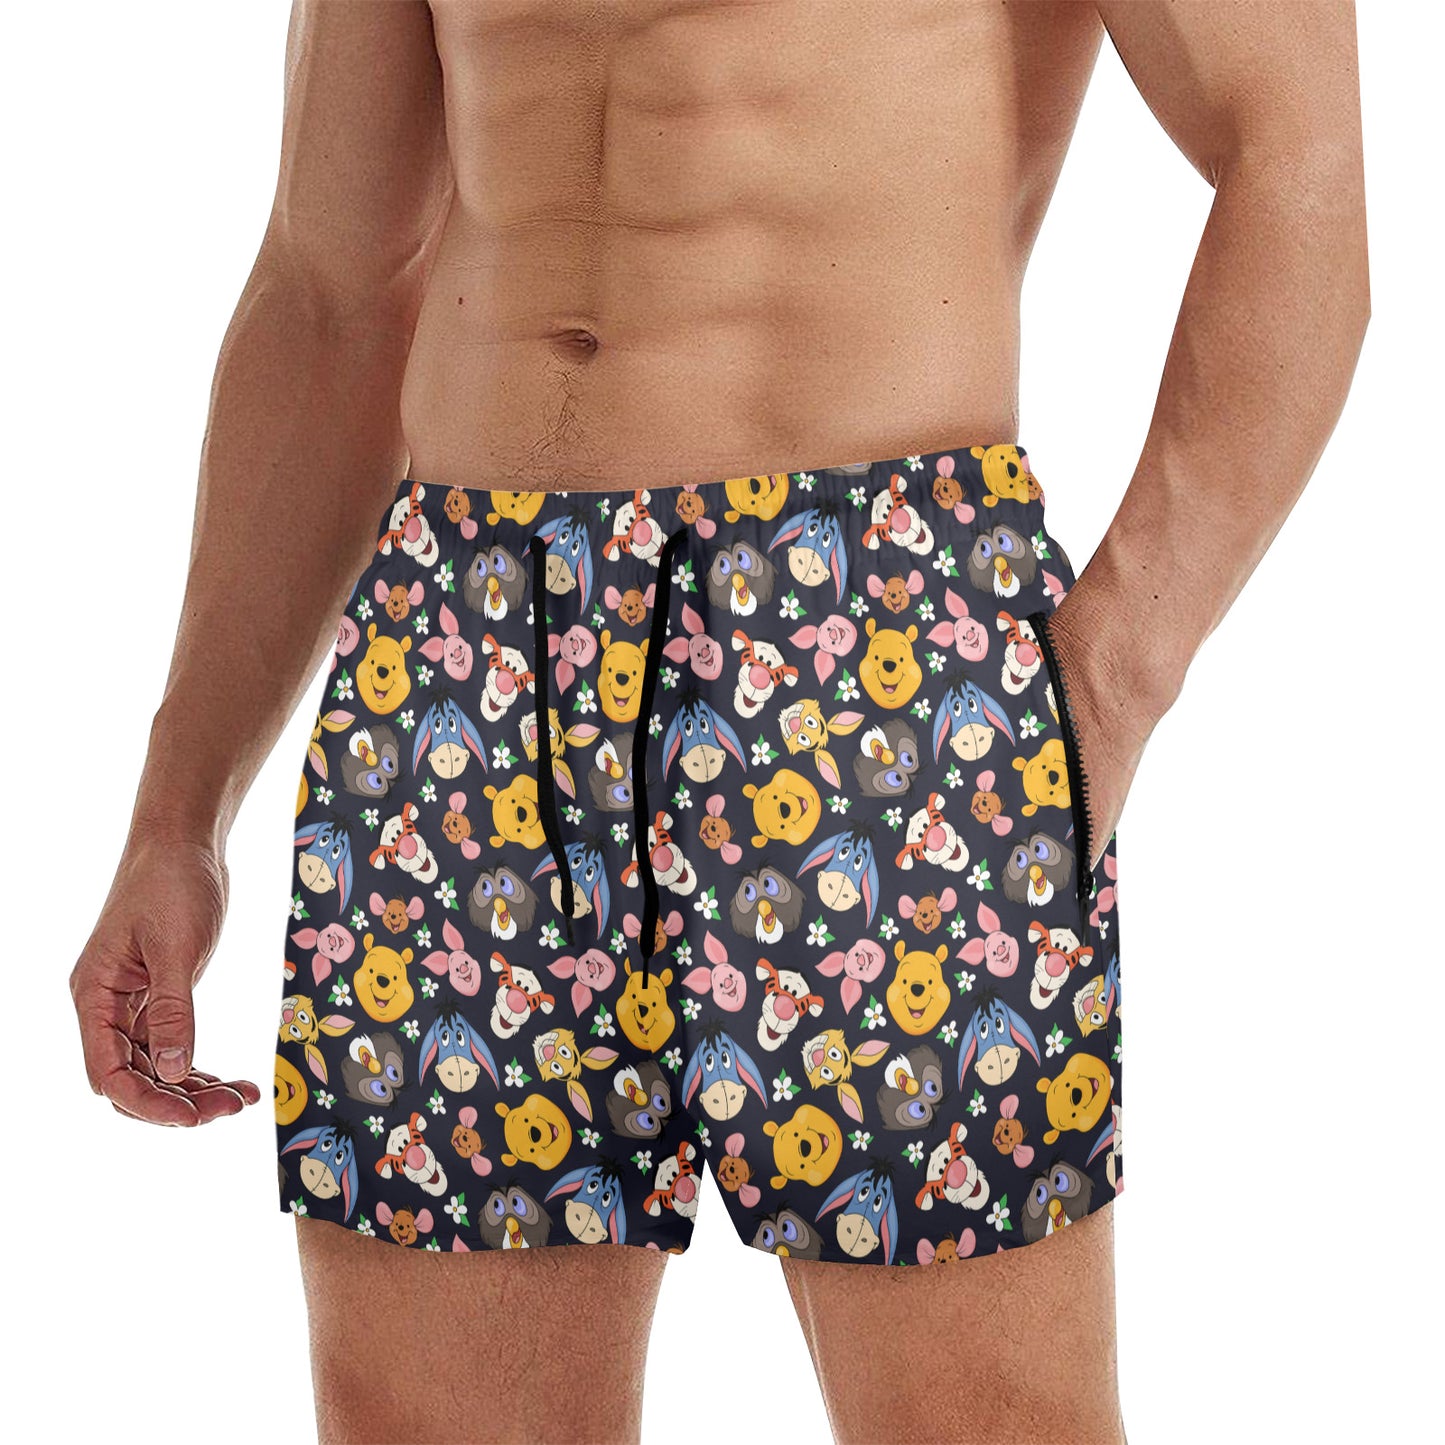 Hundred Acre Wood Friends Men's Quick Dry Athletic Shorts